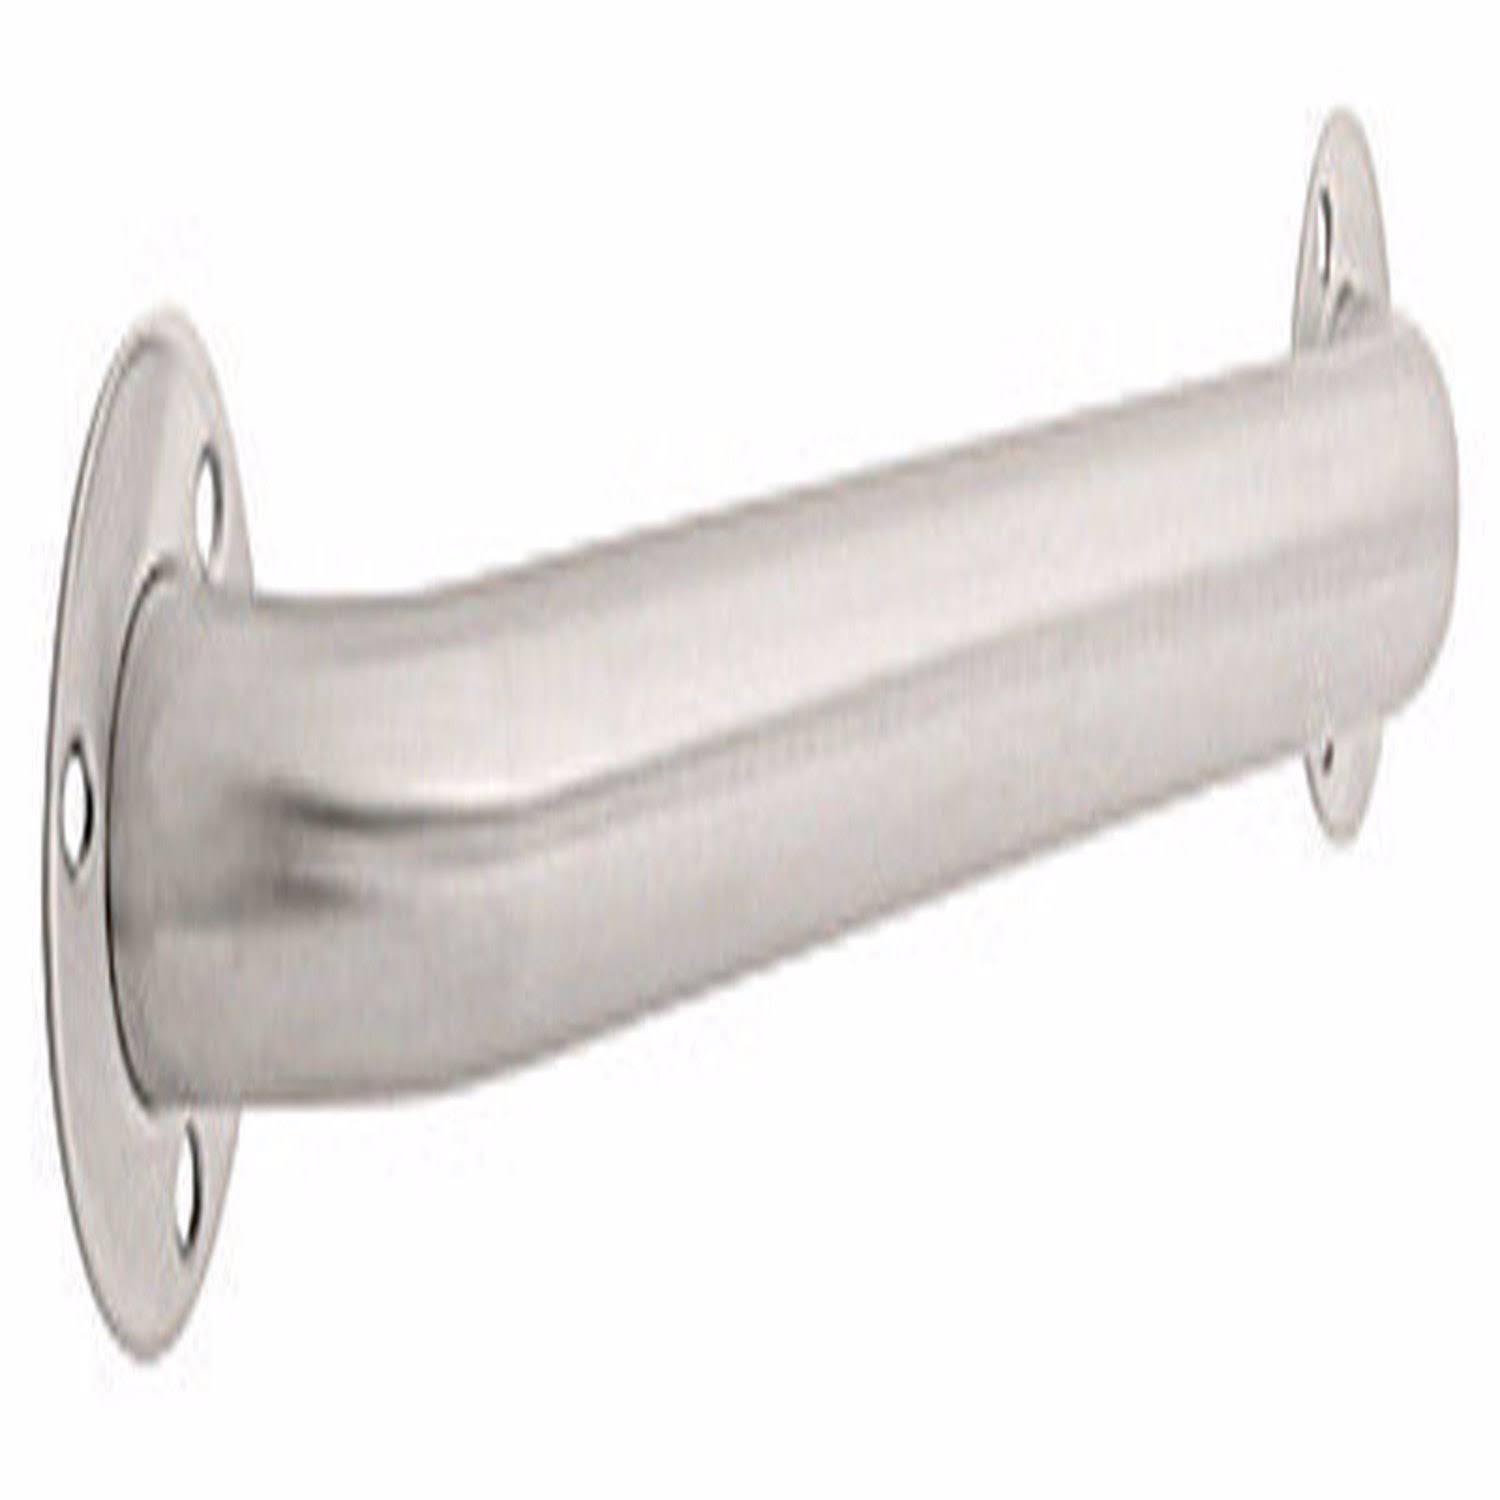 Delta Stainless Steel Safety Grab Bar